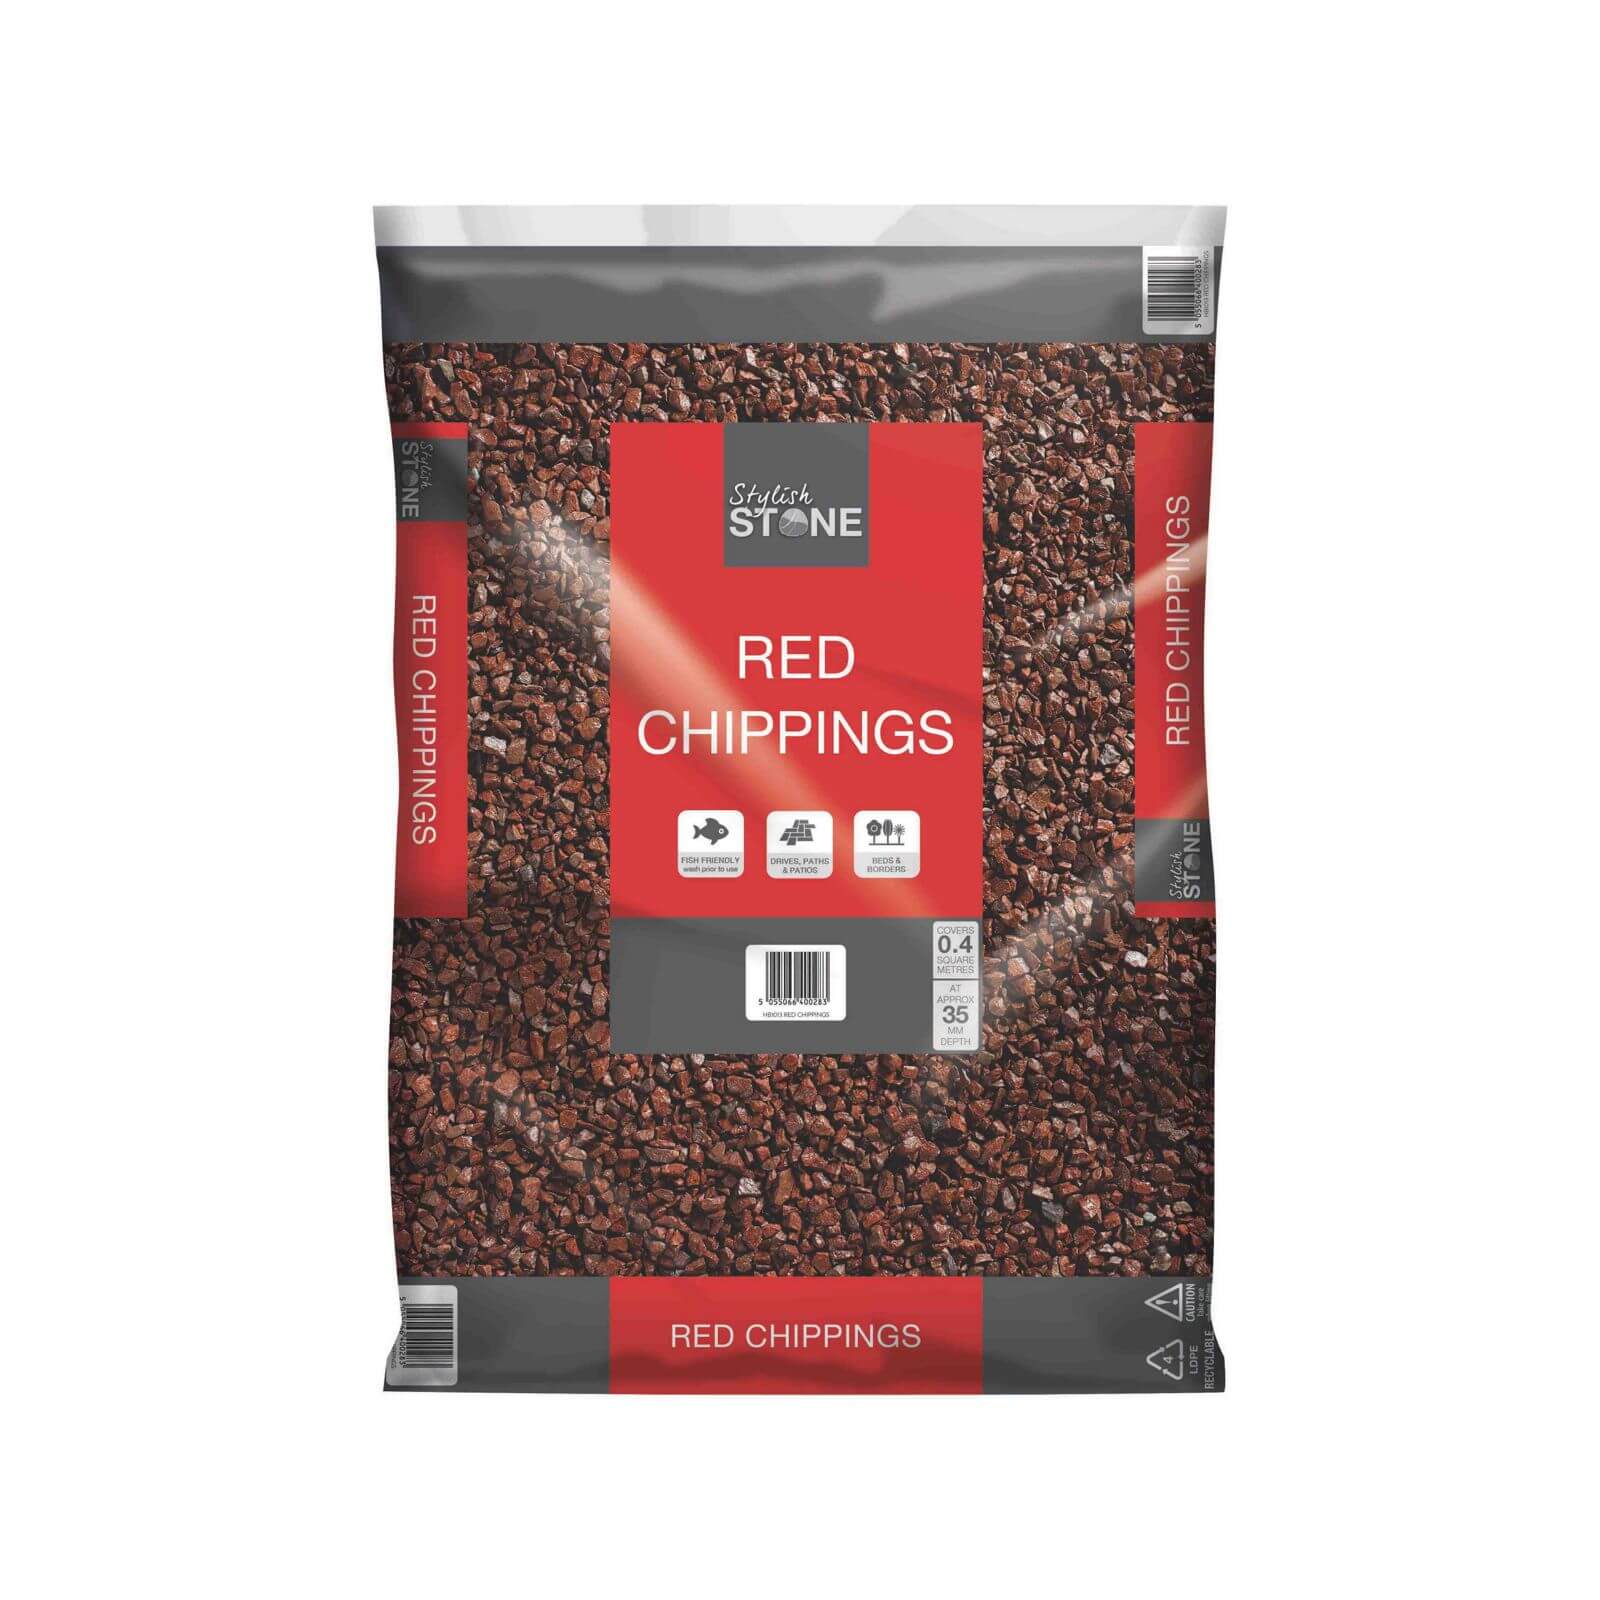 Stylish Stone Red Chippings - Large Pack - 19kg